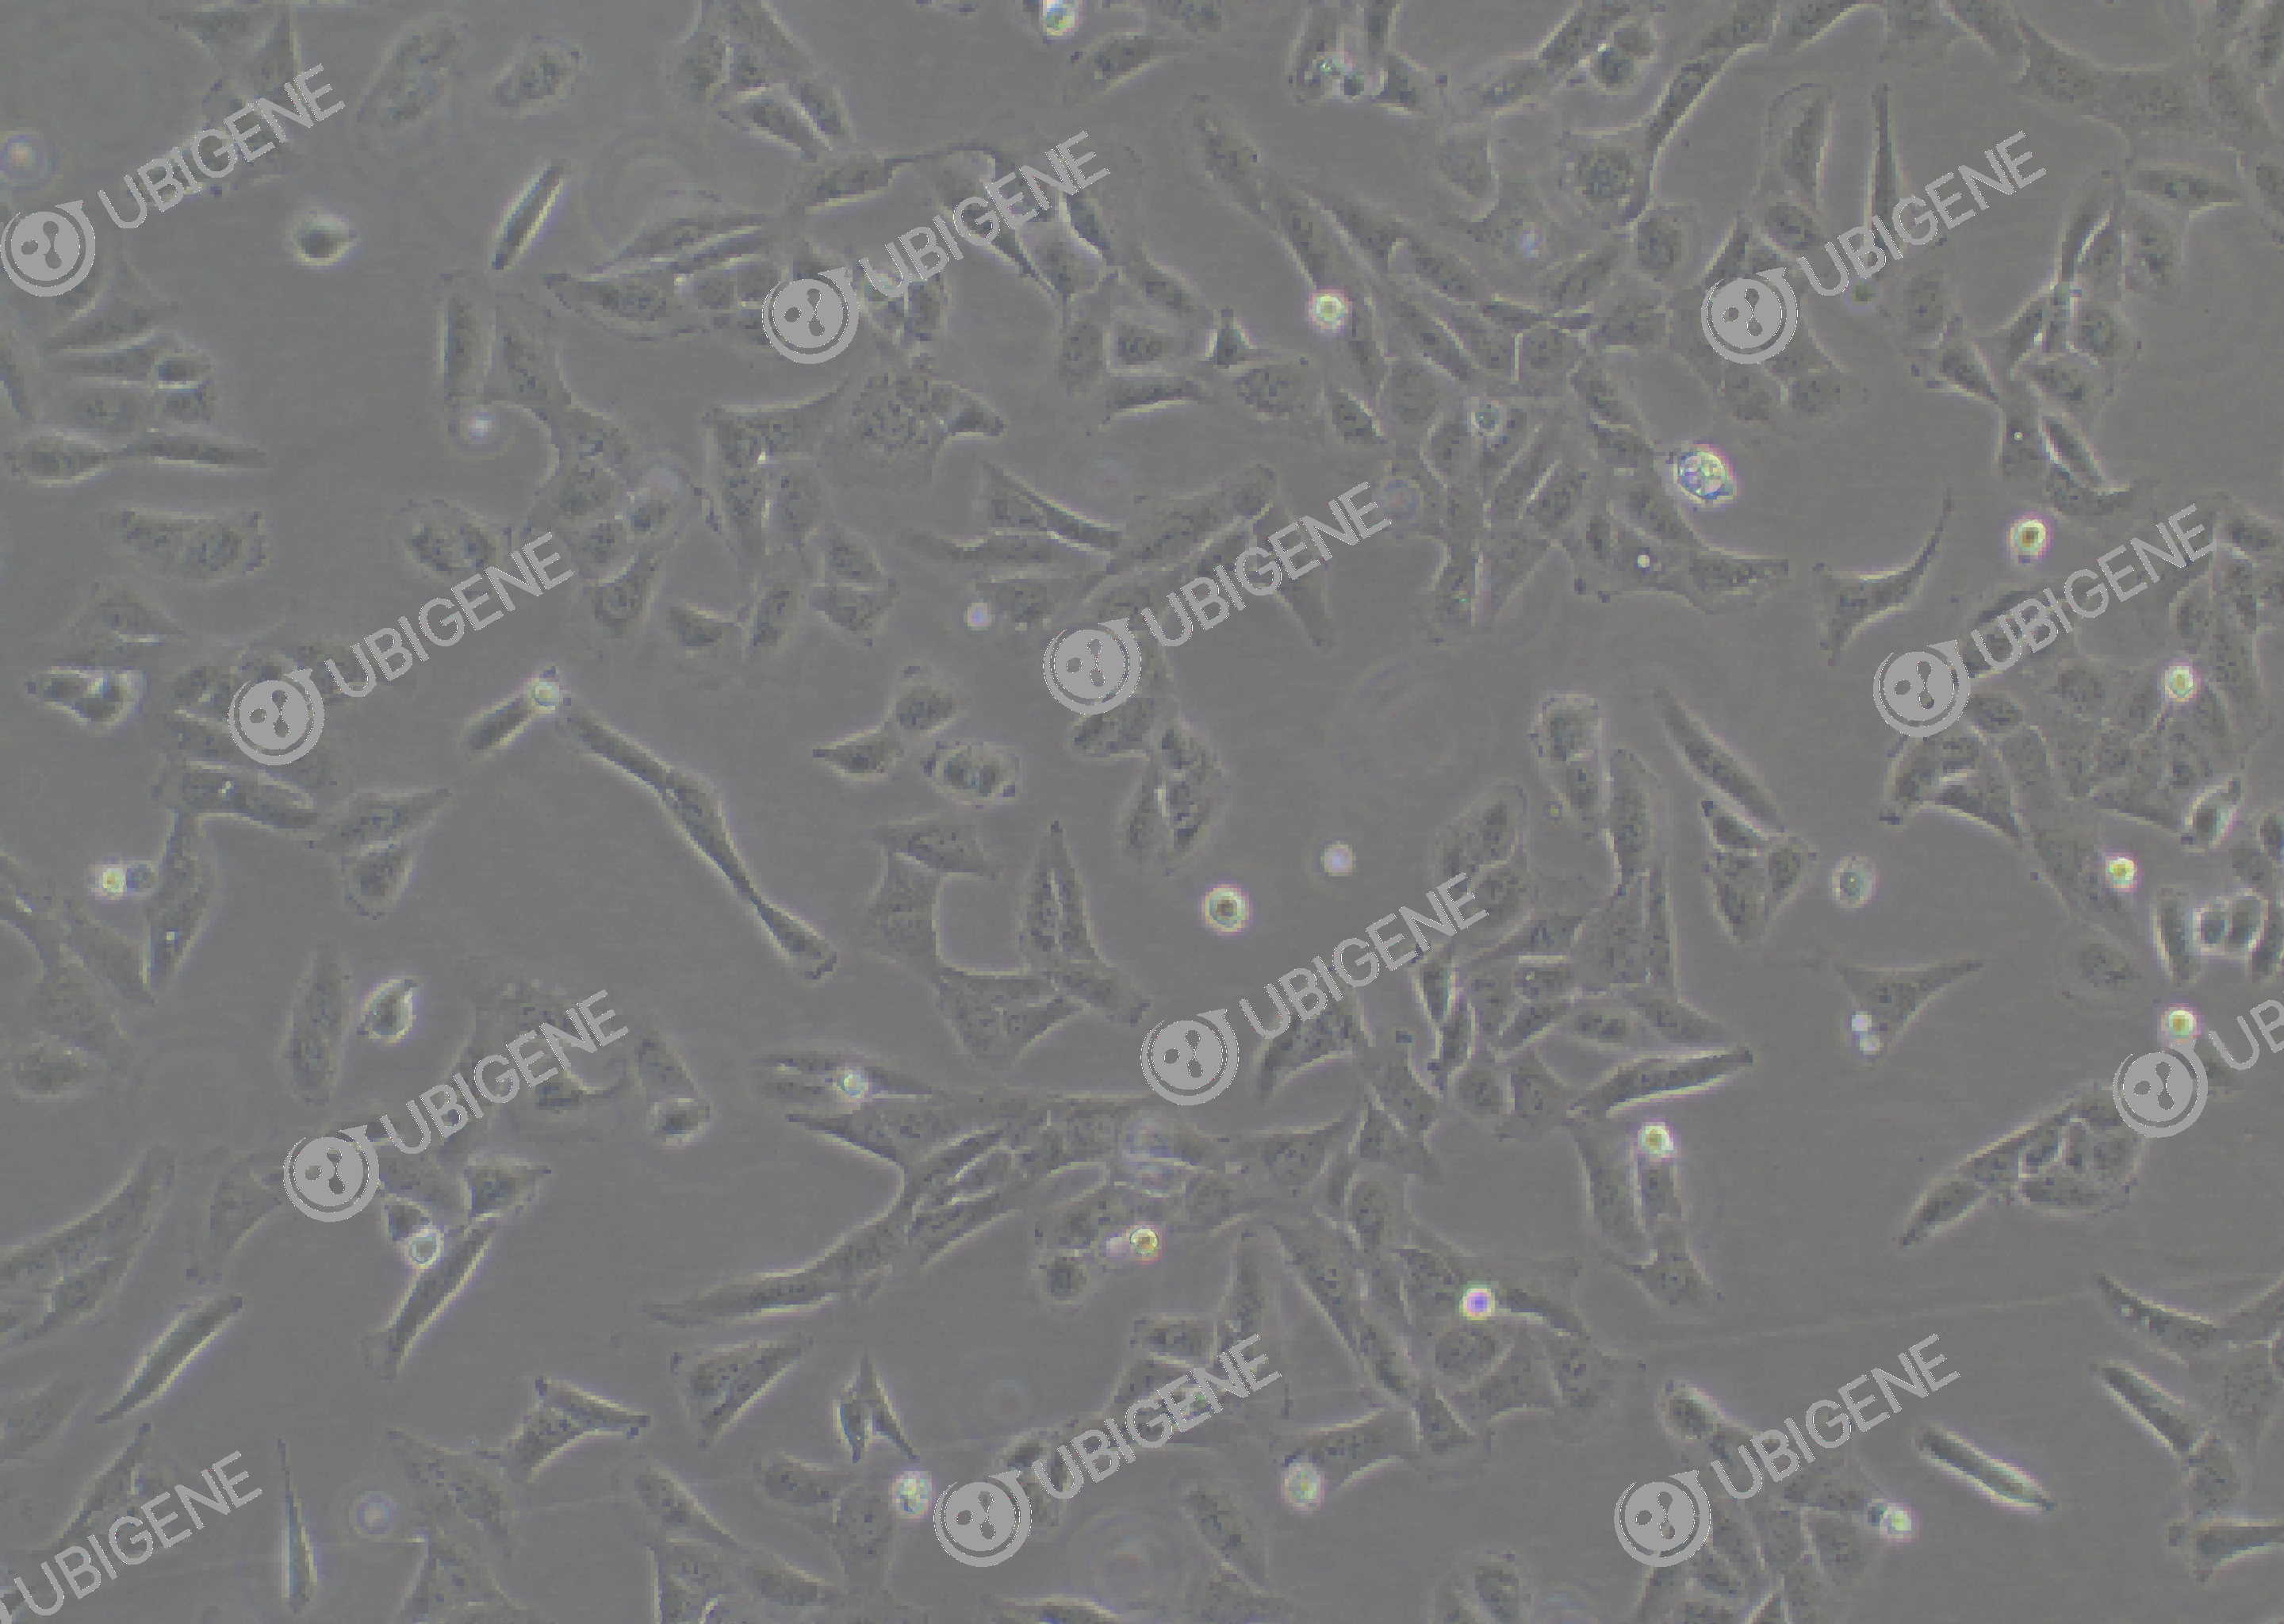 U-2 OS cell line Cultured cell morphology